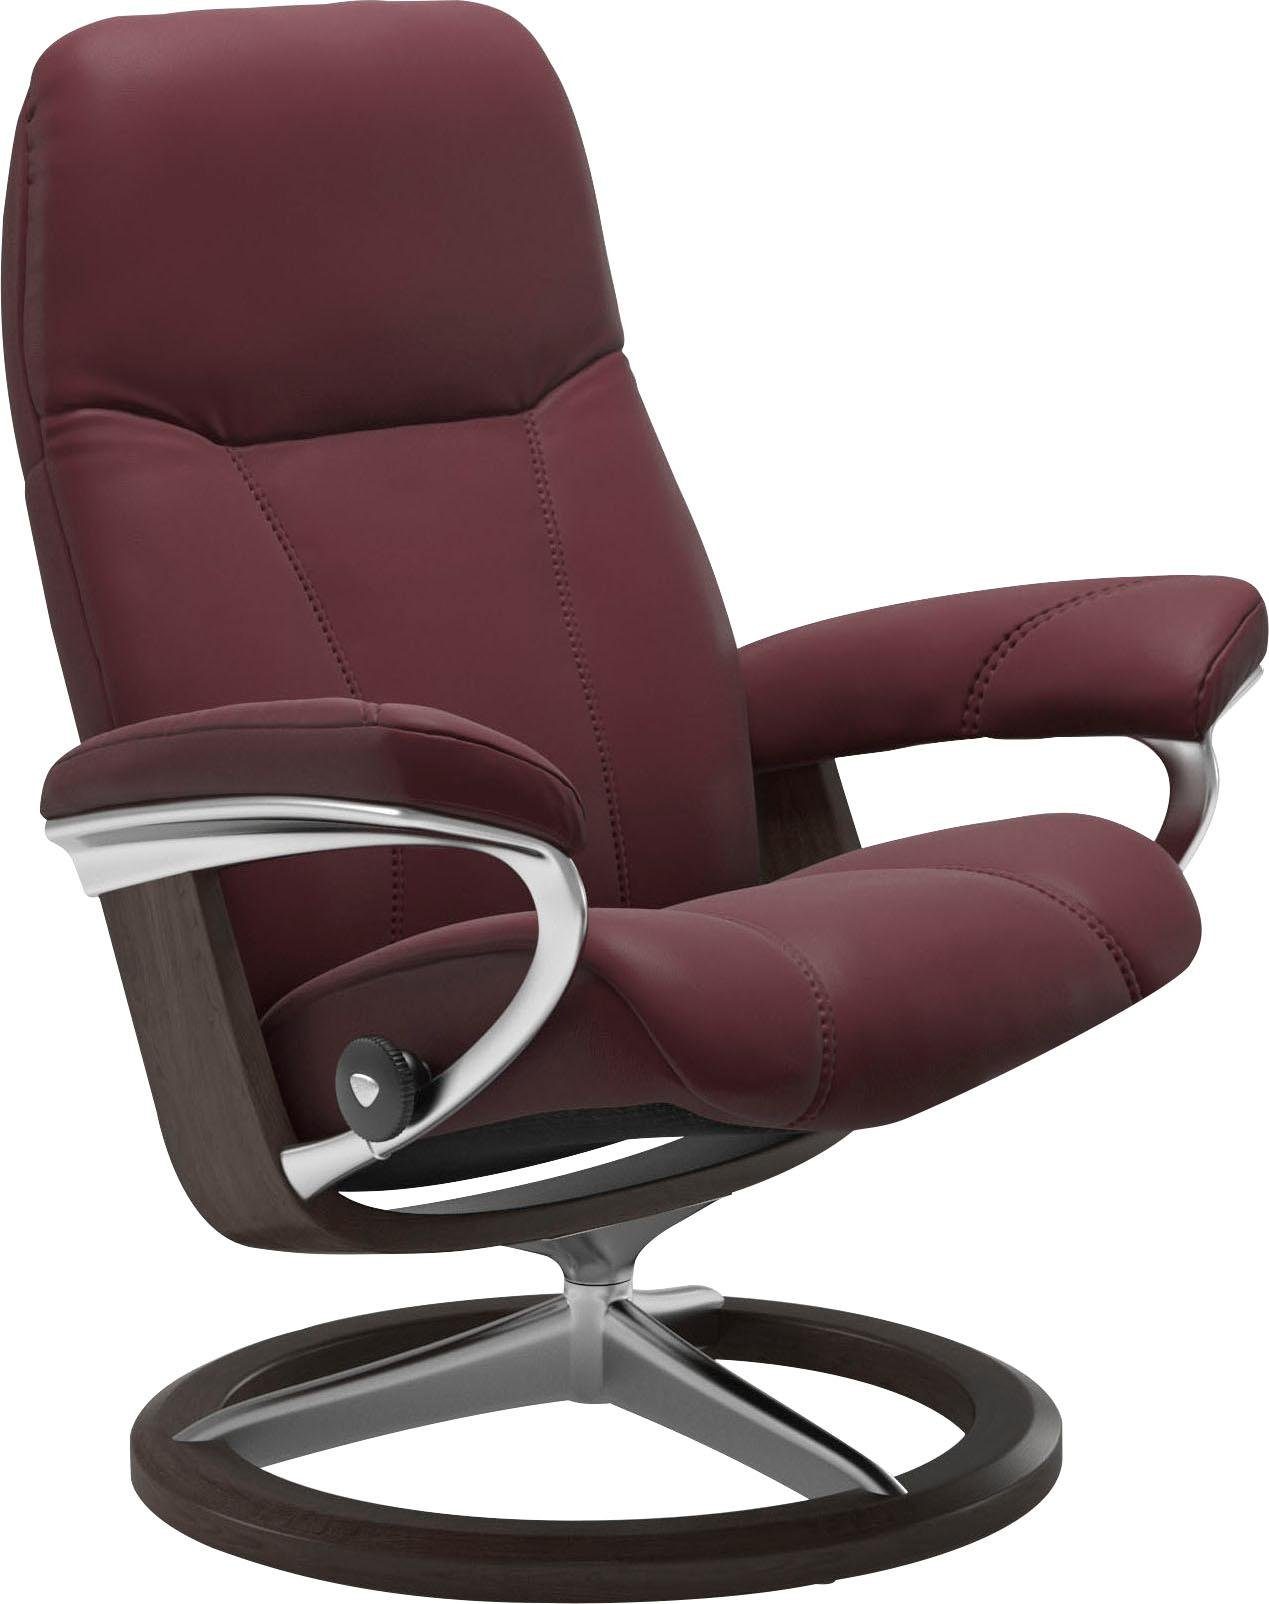 Stressless® Relaxsessel Consul, mit Signature Base, Größe Wenge Gestell L